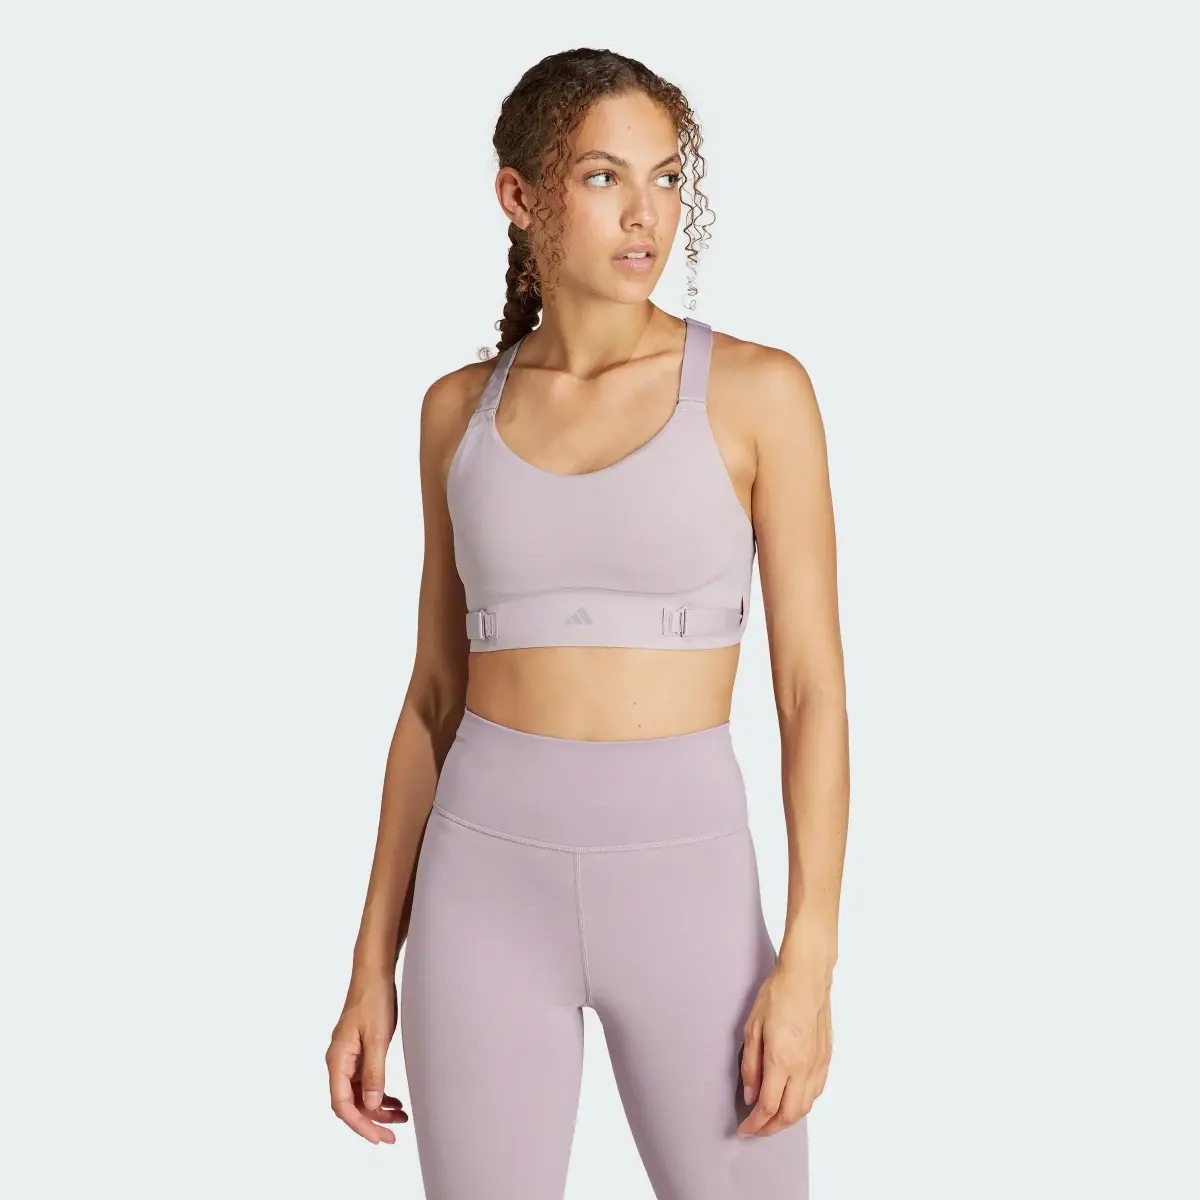 Adidas Brassière FastImpact Luxe Run Maintien fort. 2